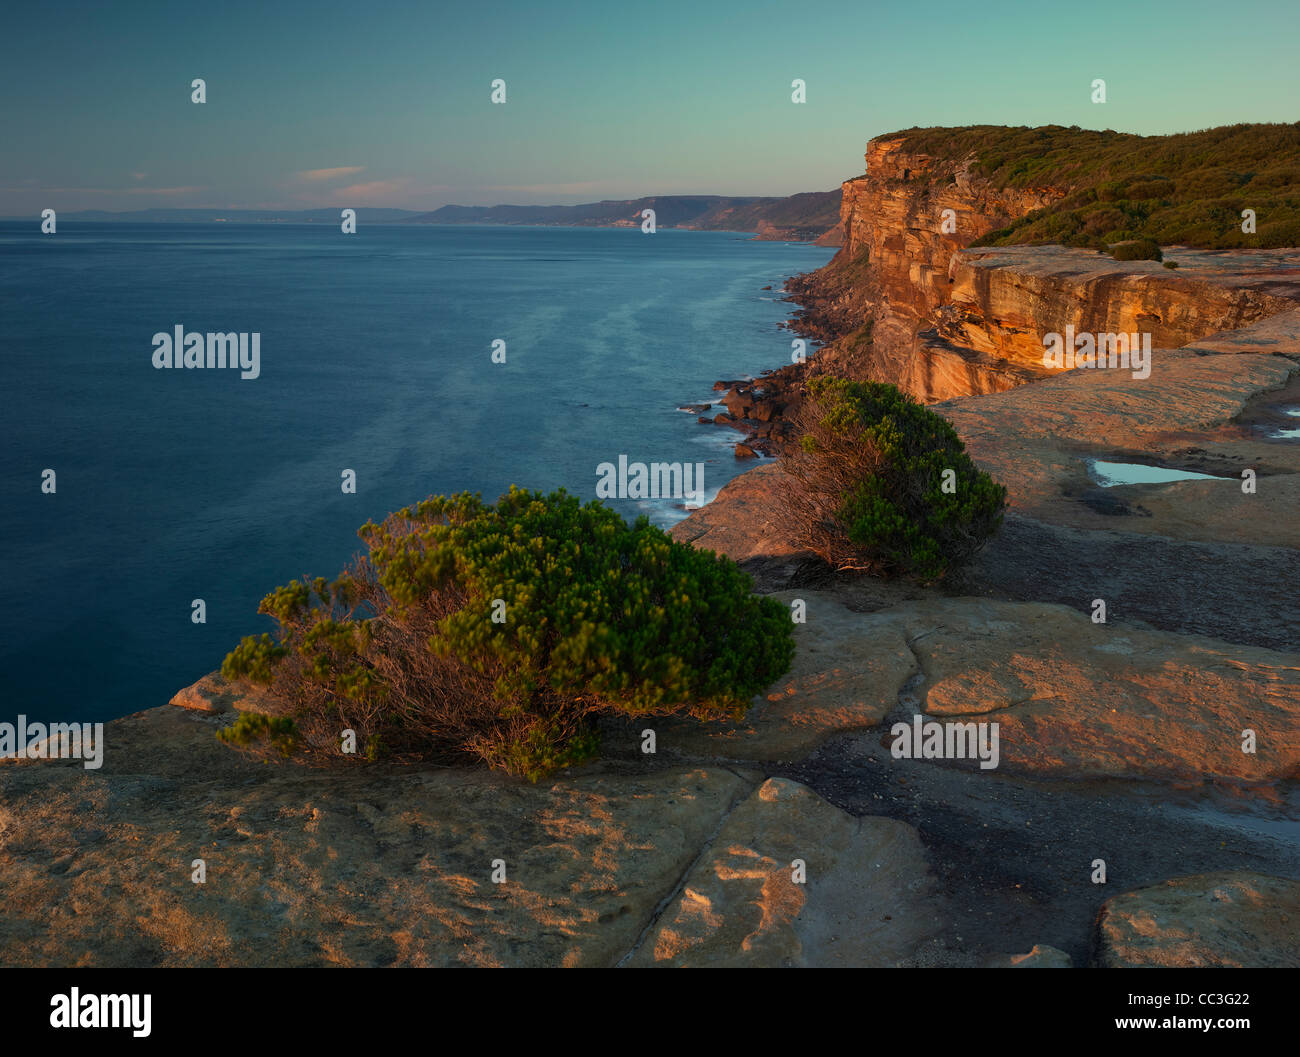 Cliffs, Looking South to the Illawarra. Royal National Park, NSW Australia Stock Photo